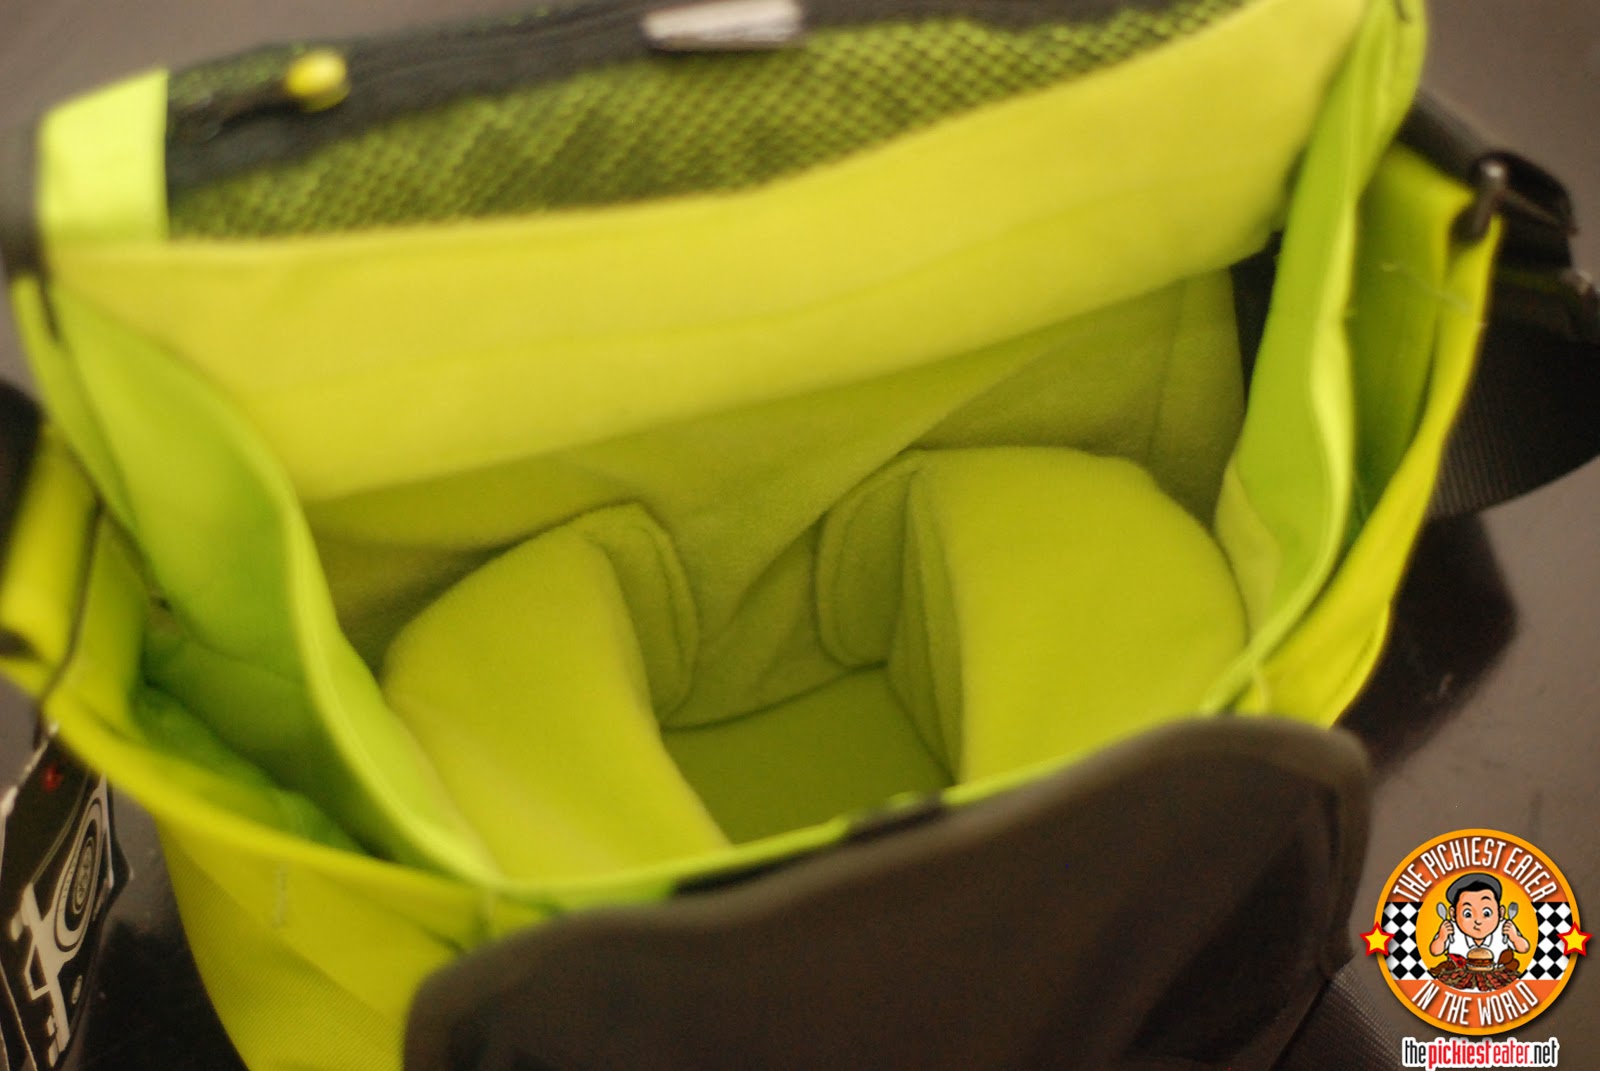 The Crumpler 5 Million Dollar Home Bag Review